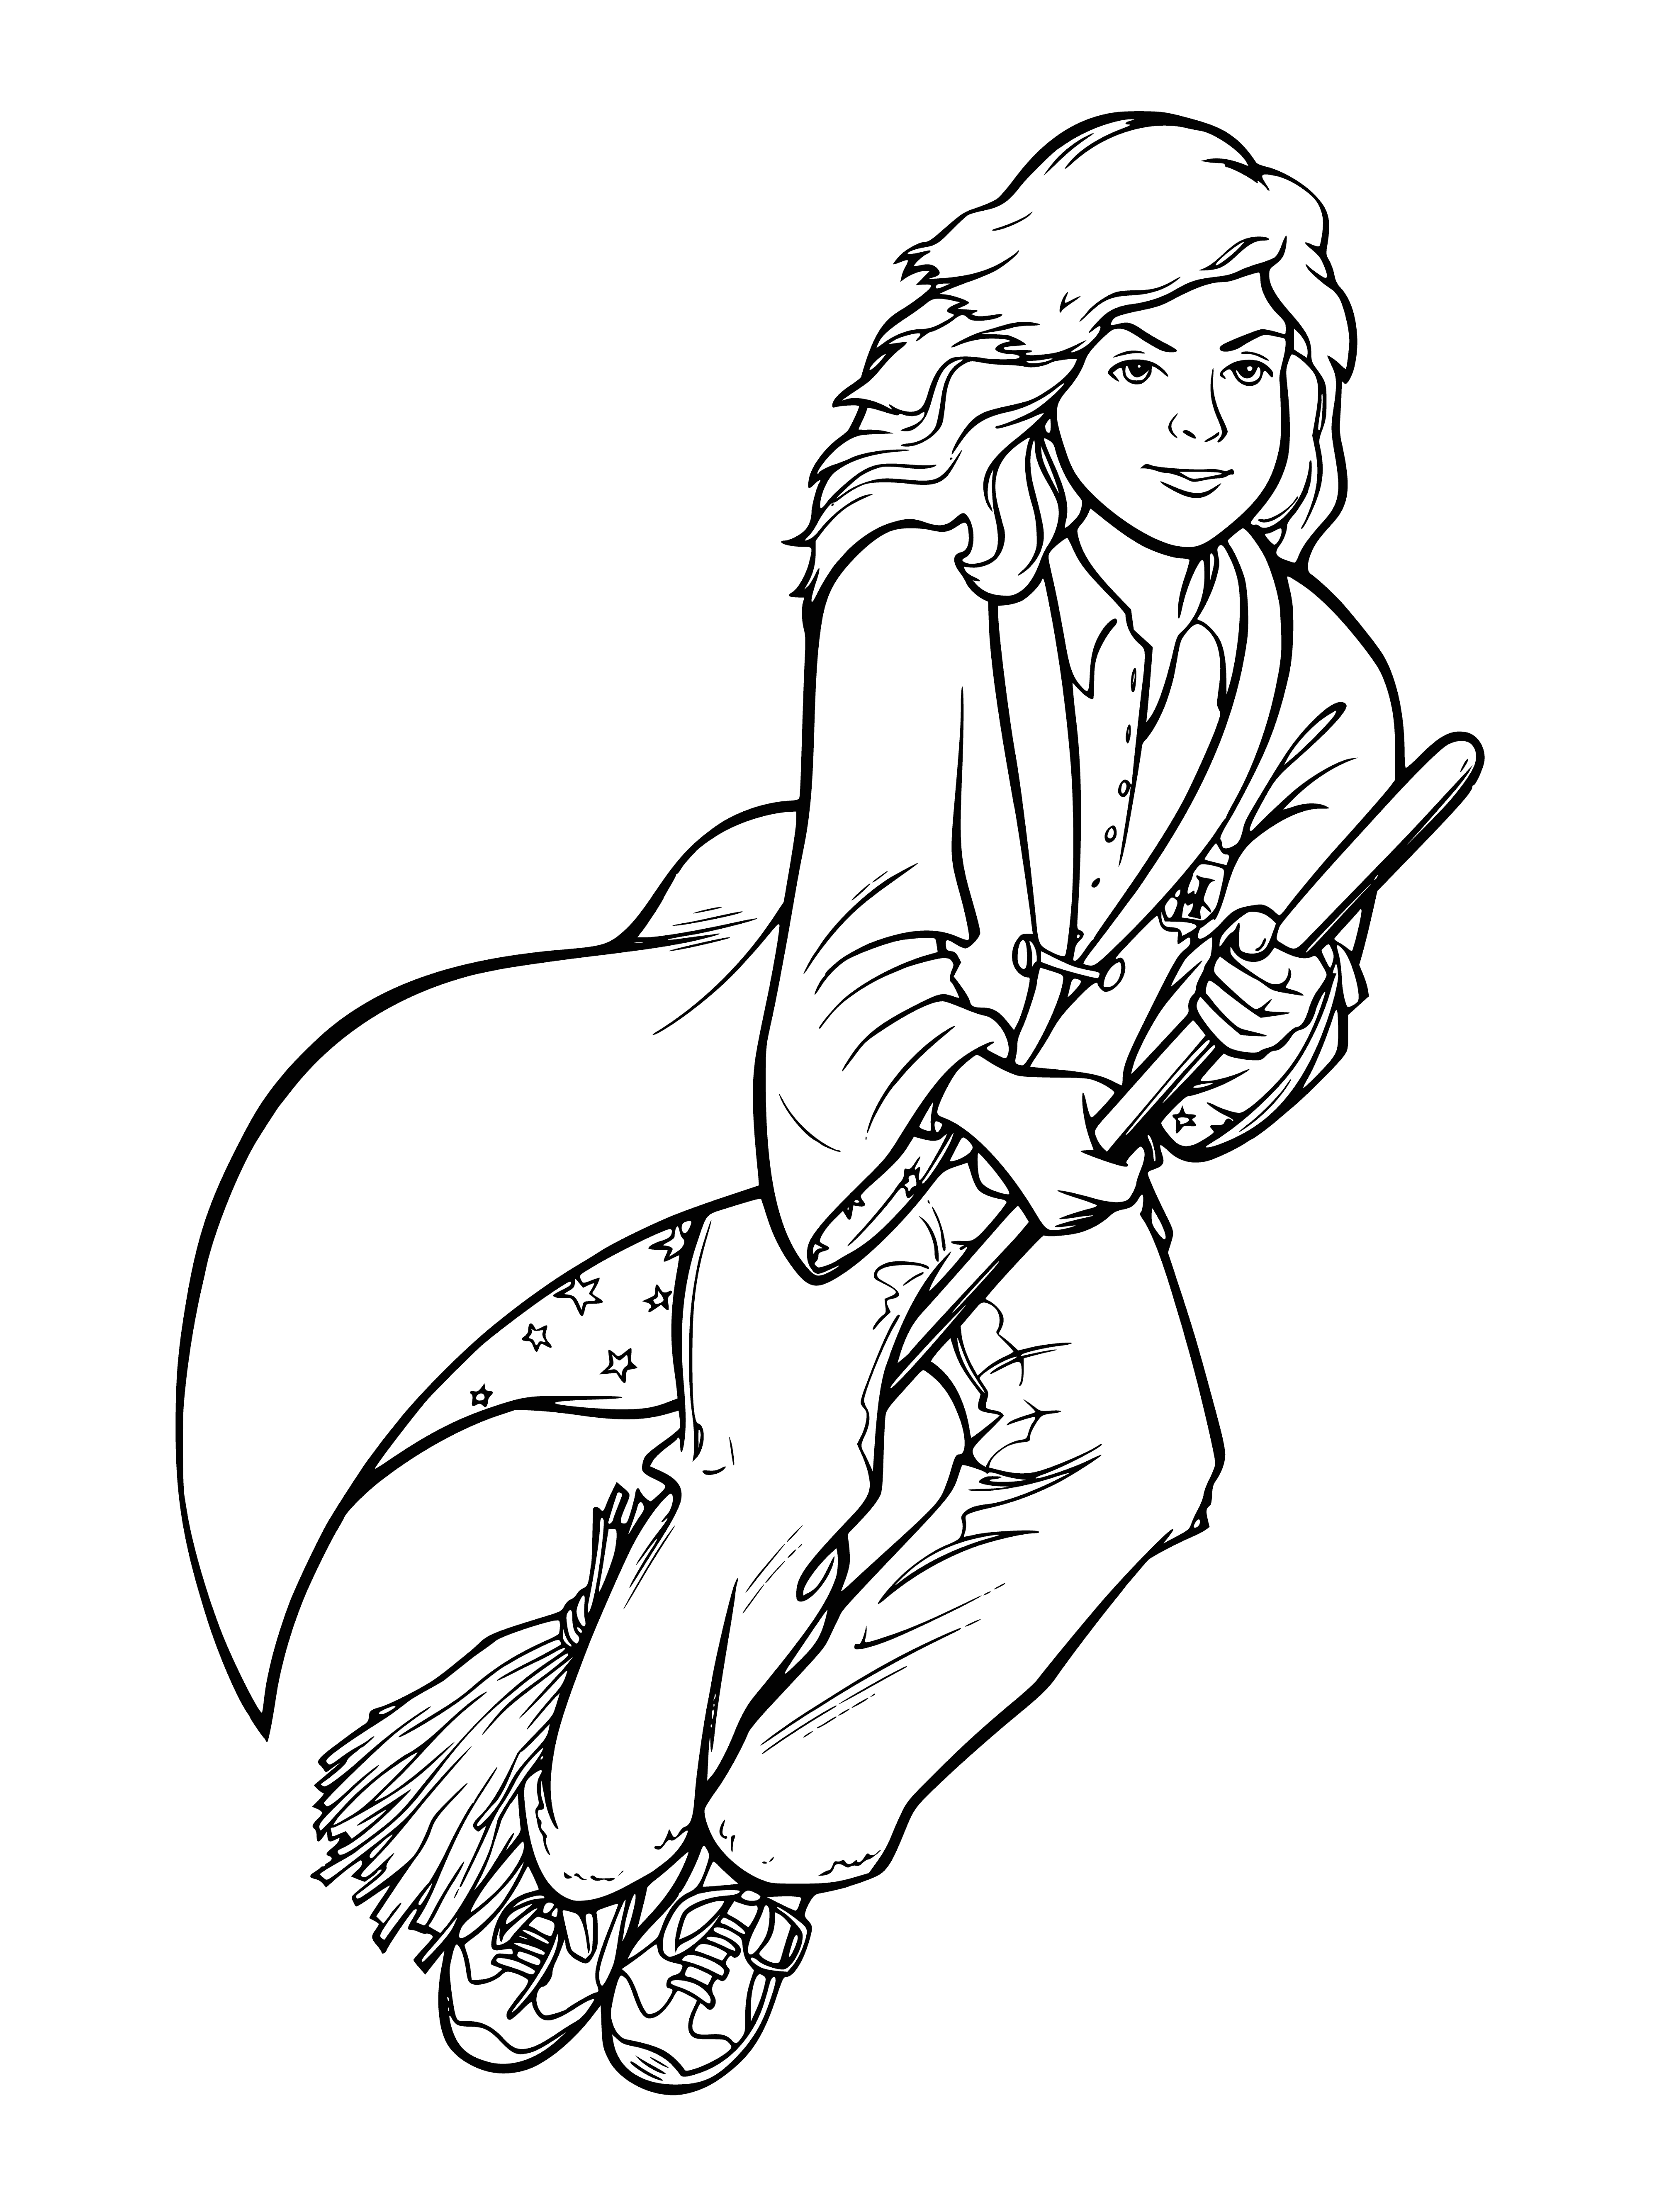 Hermione coloring page